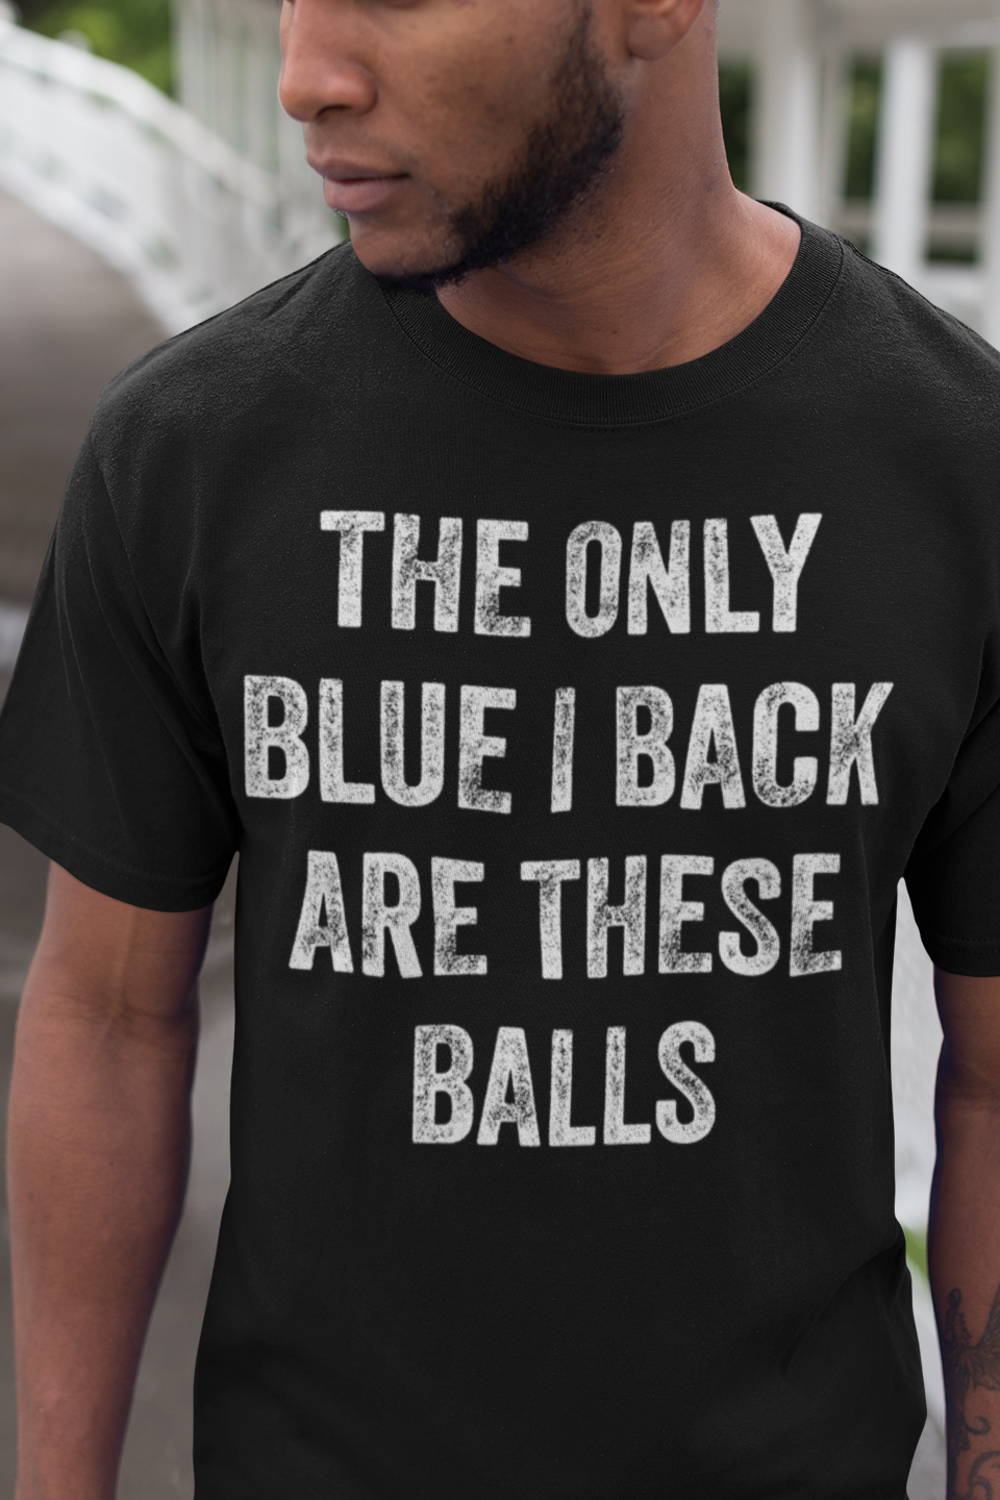 The Only Blue I Back Are These Balls Men's Classic T-Shirt